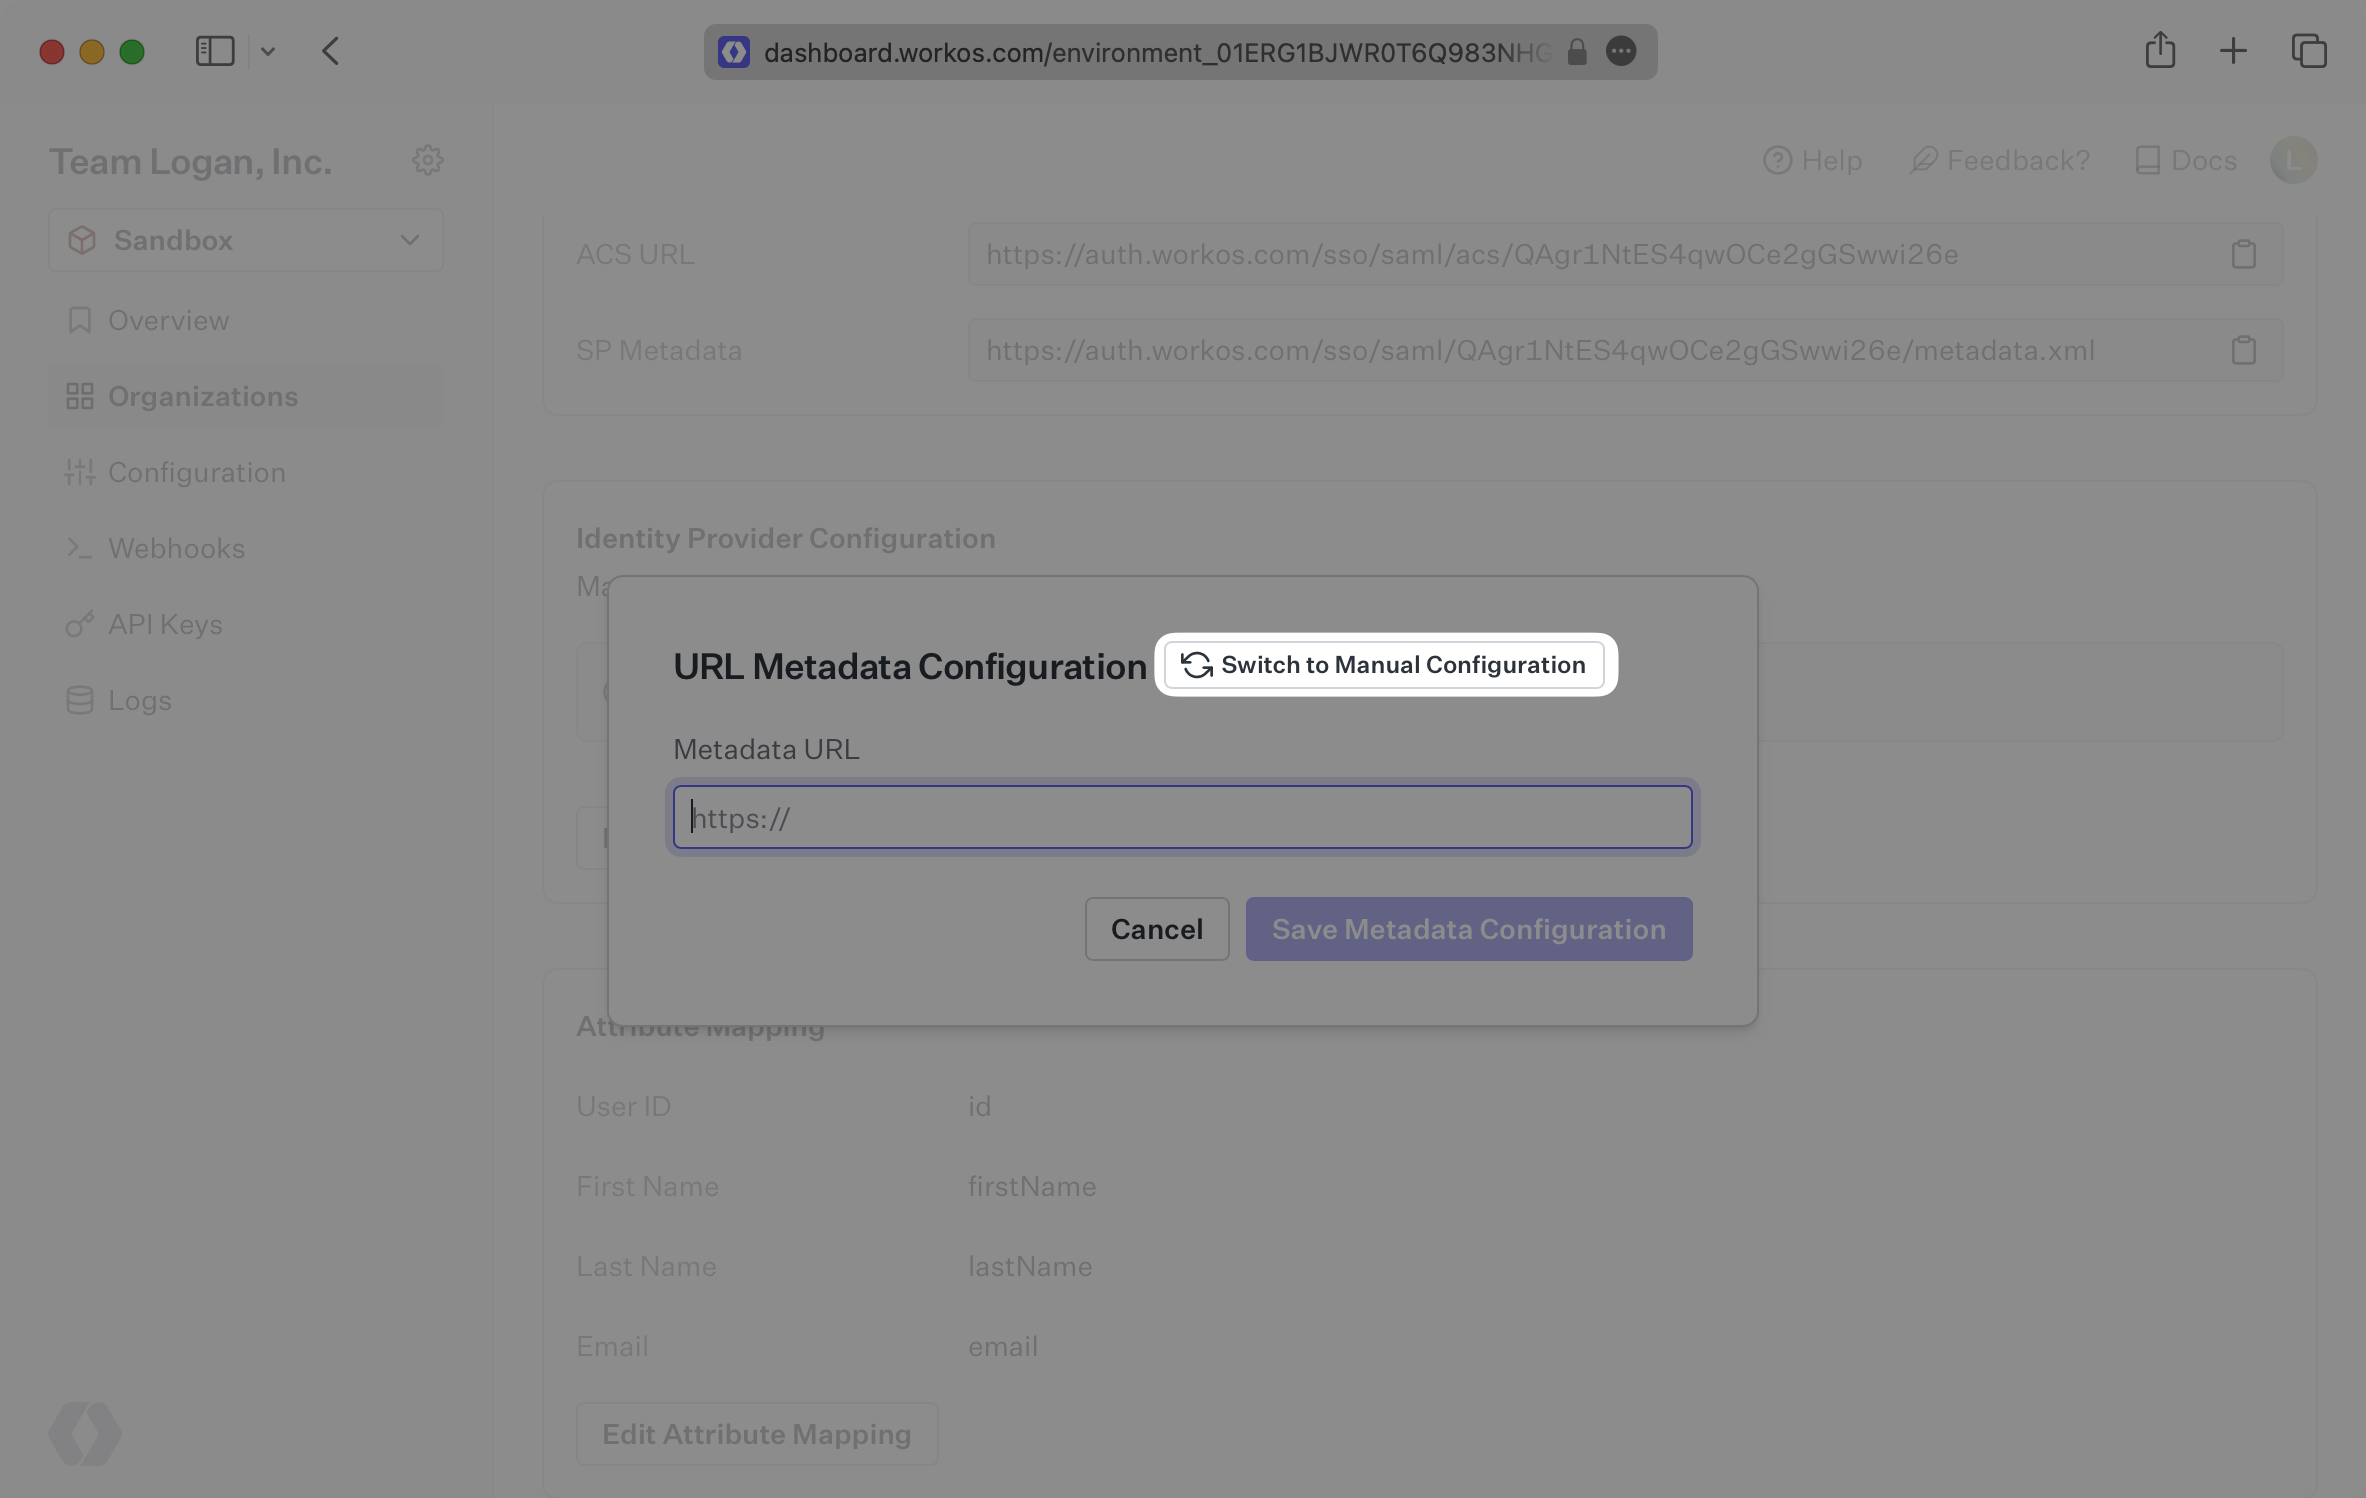 A screenshot highlighting the "Switch to Manual Confifuration" button on the URL Metadata Configuration modal of a CAS SAML connection in the WorkOS Dashboard.